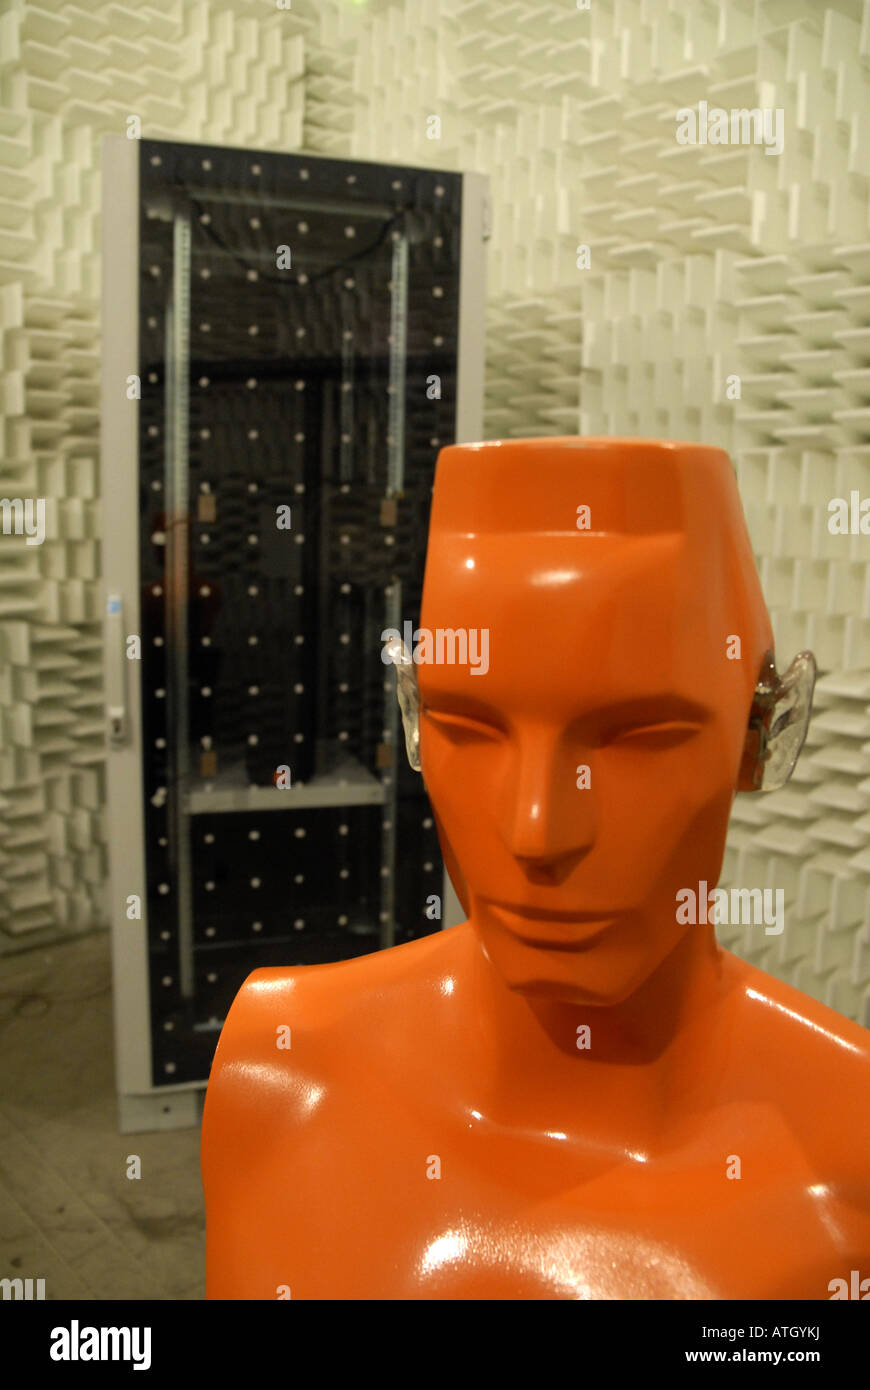 Dummy artificial head measuring the noise of an IT-Rack working as a demonstrator for 'Active Structural Acoustic Control'(ASAC) Stock Photo